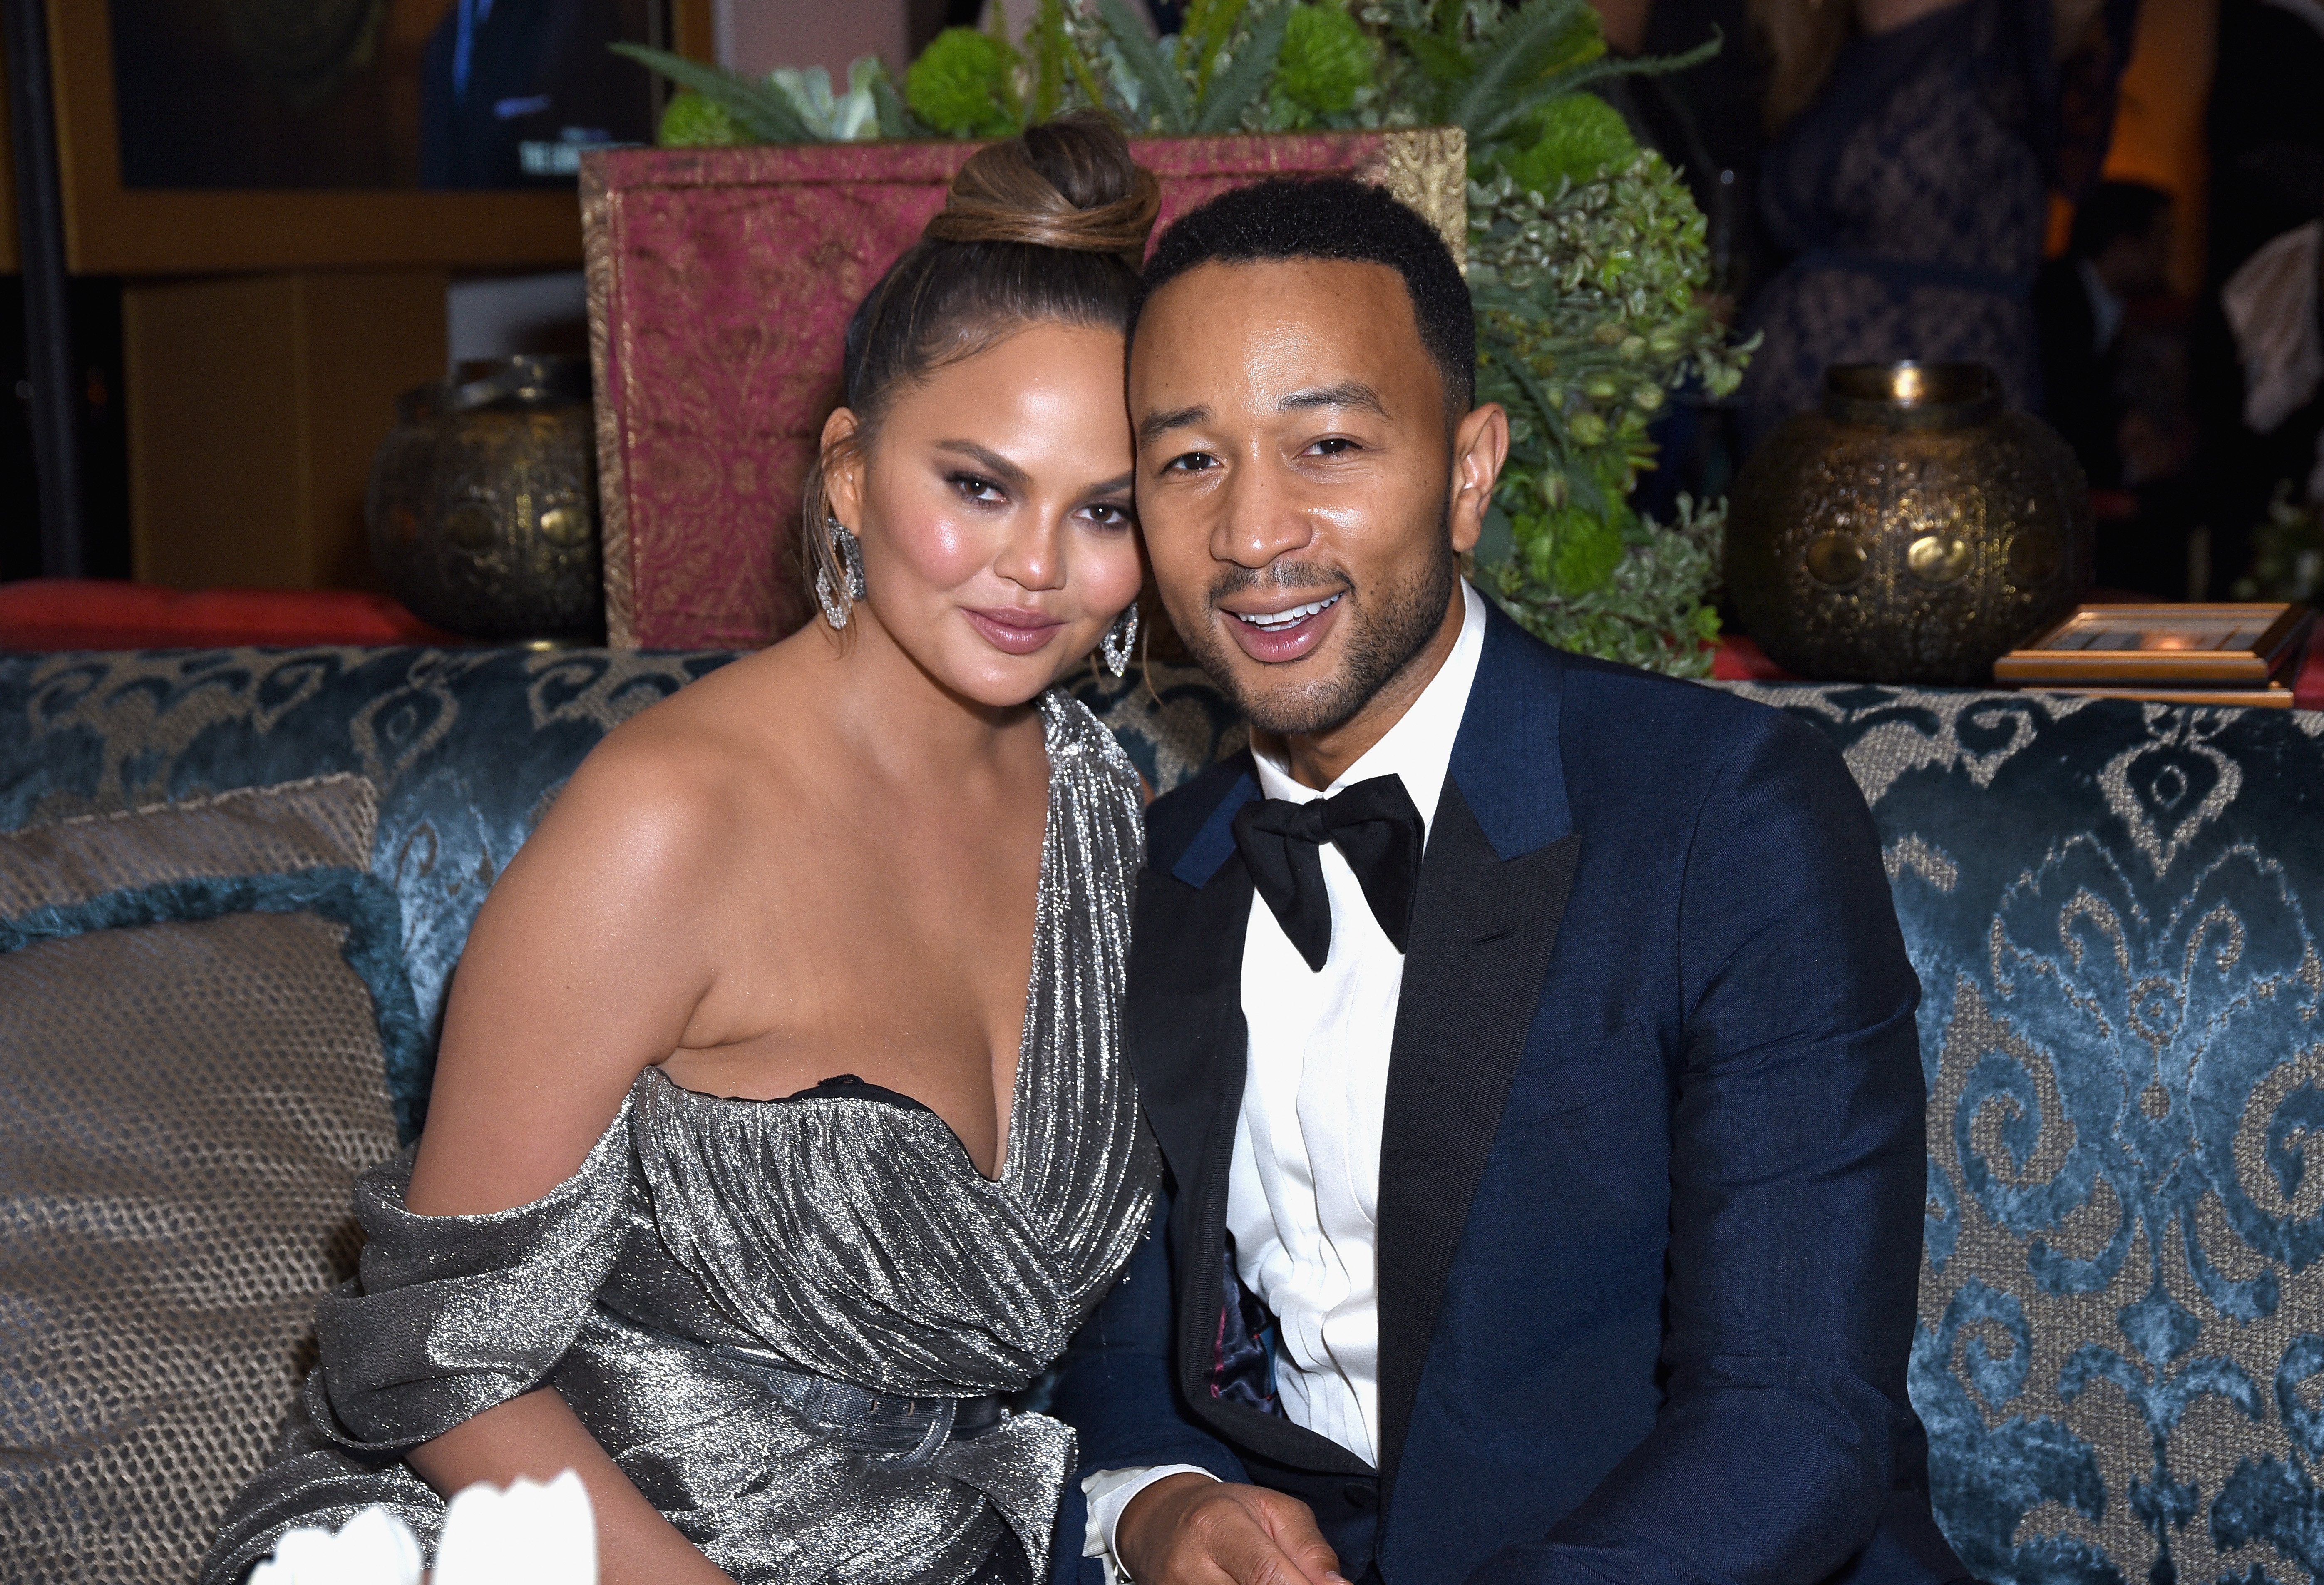 Chrissy Teigen and John Legend attend Hulu's 2018 Emmy Party on September 17, 2018.  | Photo: Getty Images